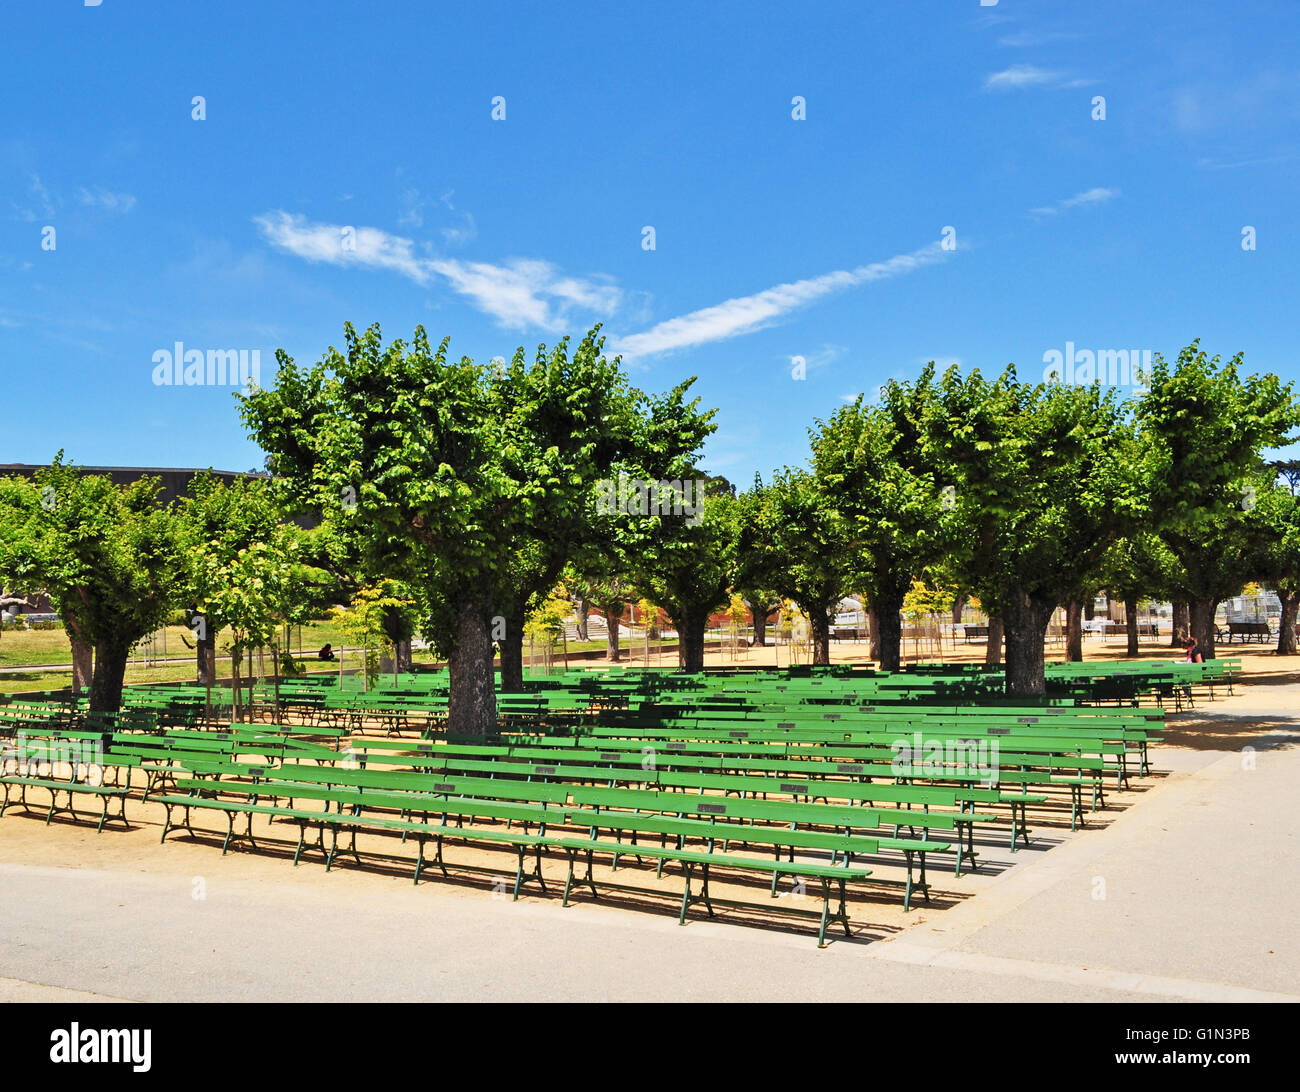 San Francisco: trees in the Music Concourse, open-air plaza within Golden Gate Park flanking the California Academy of Sciences natural history museum Stock Photo